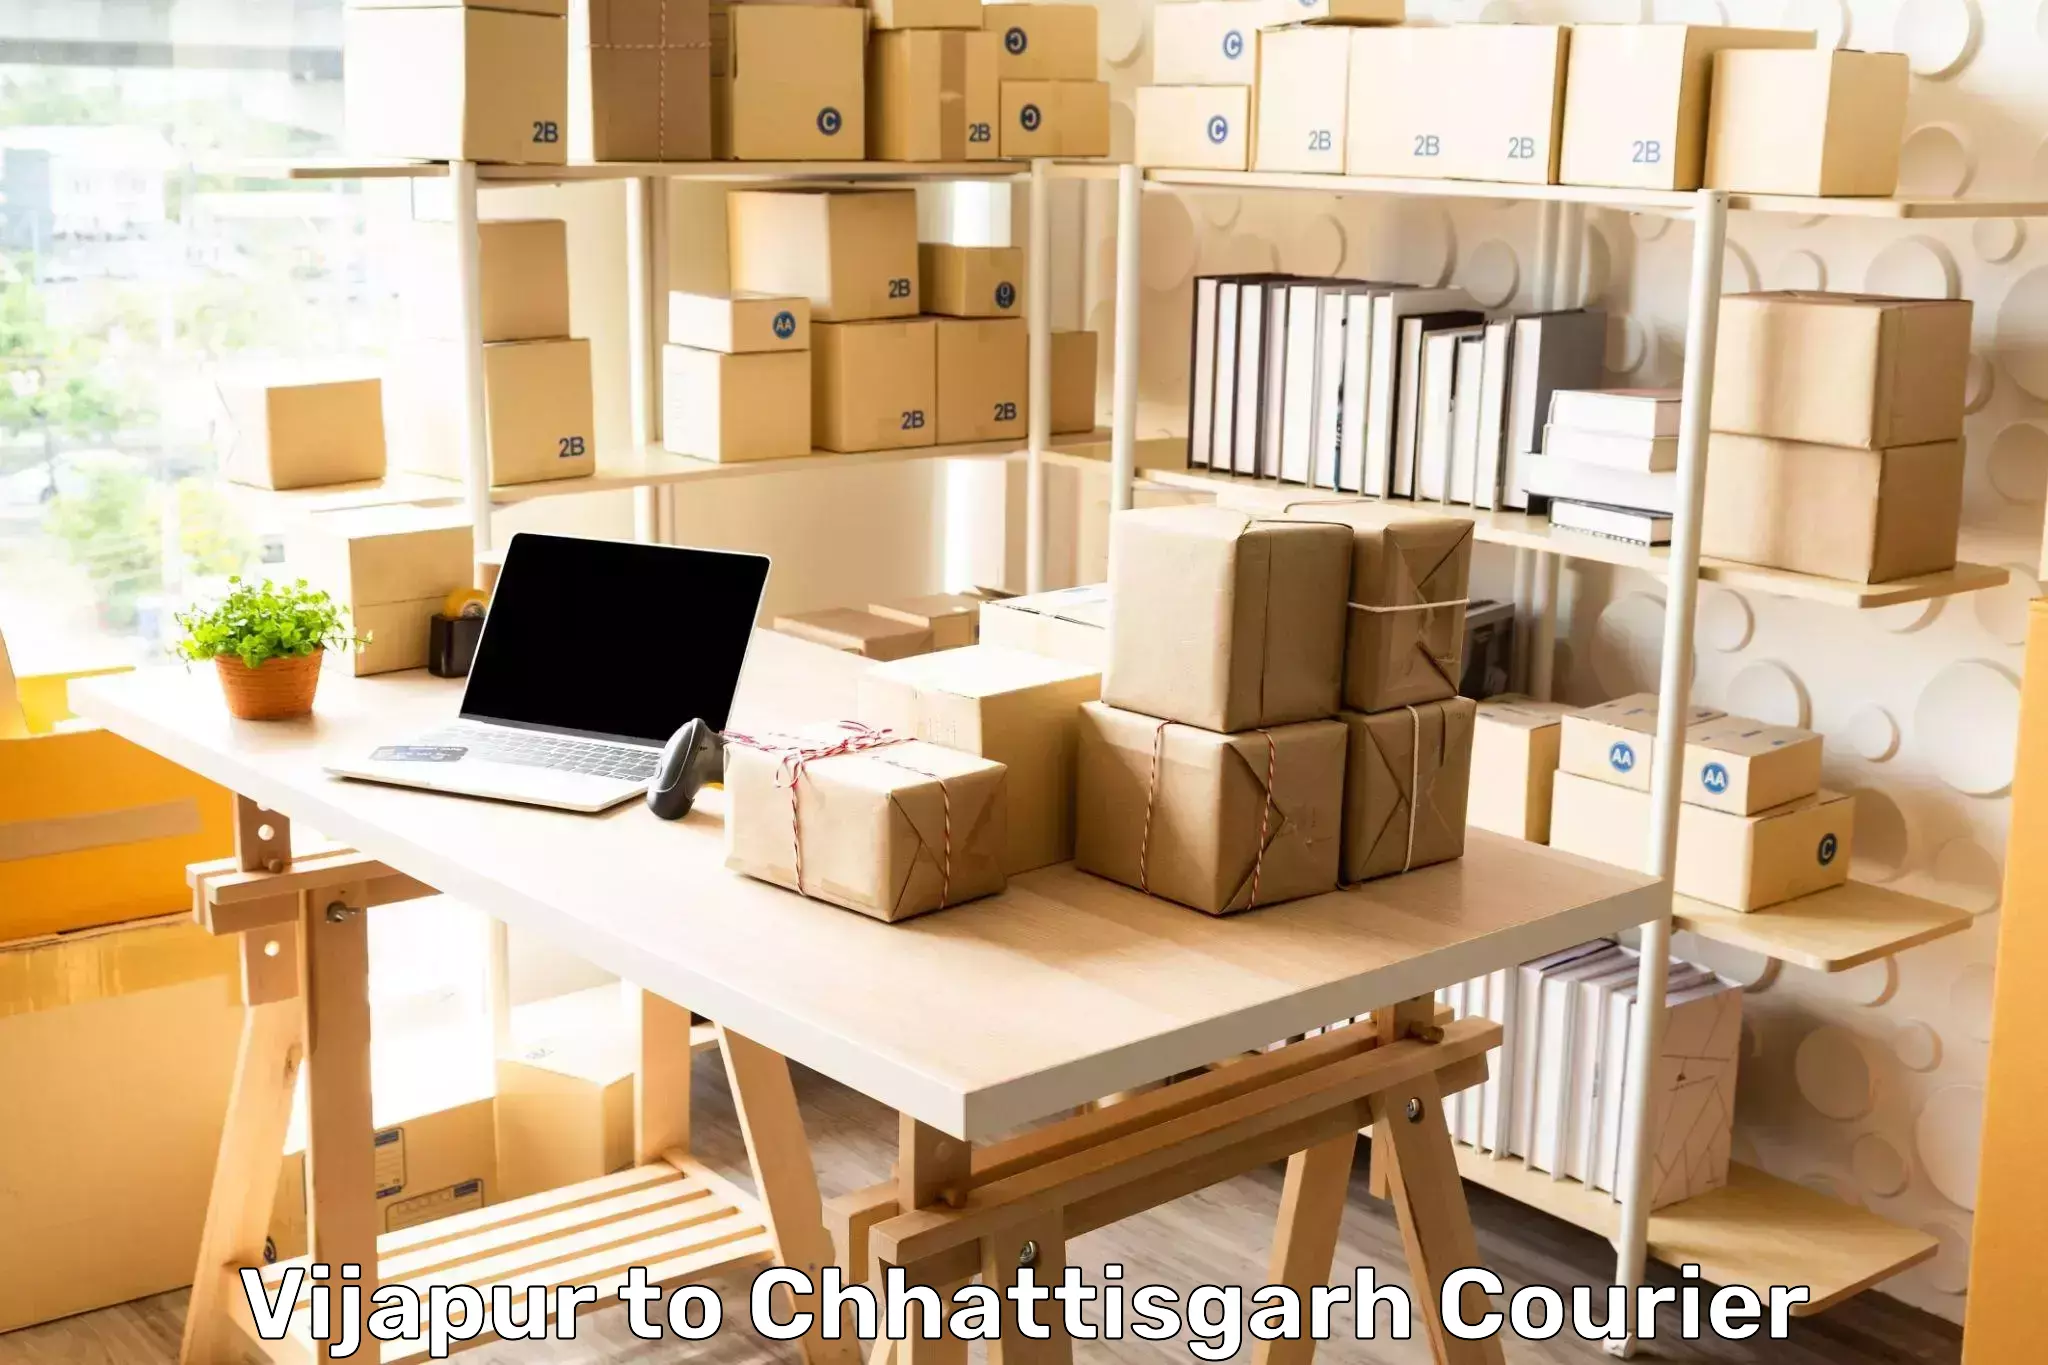 State-of-the-art courier technology in Vijapur to Premnagar